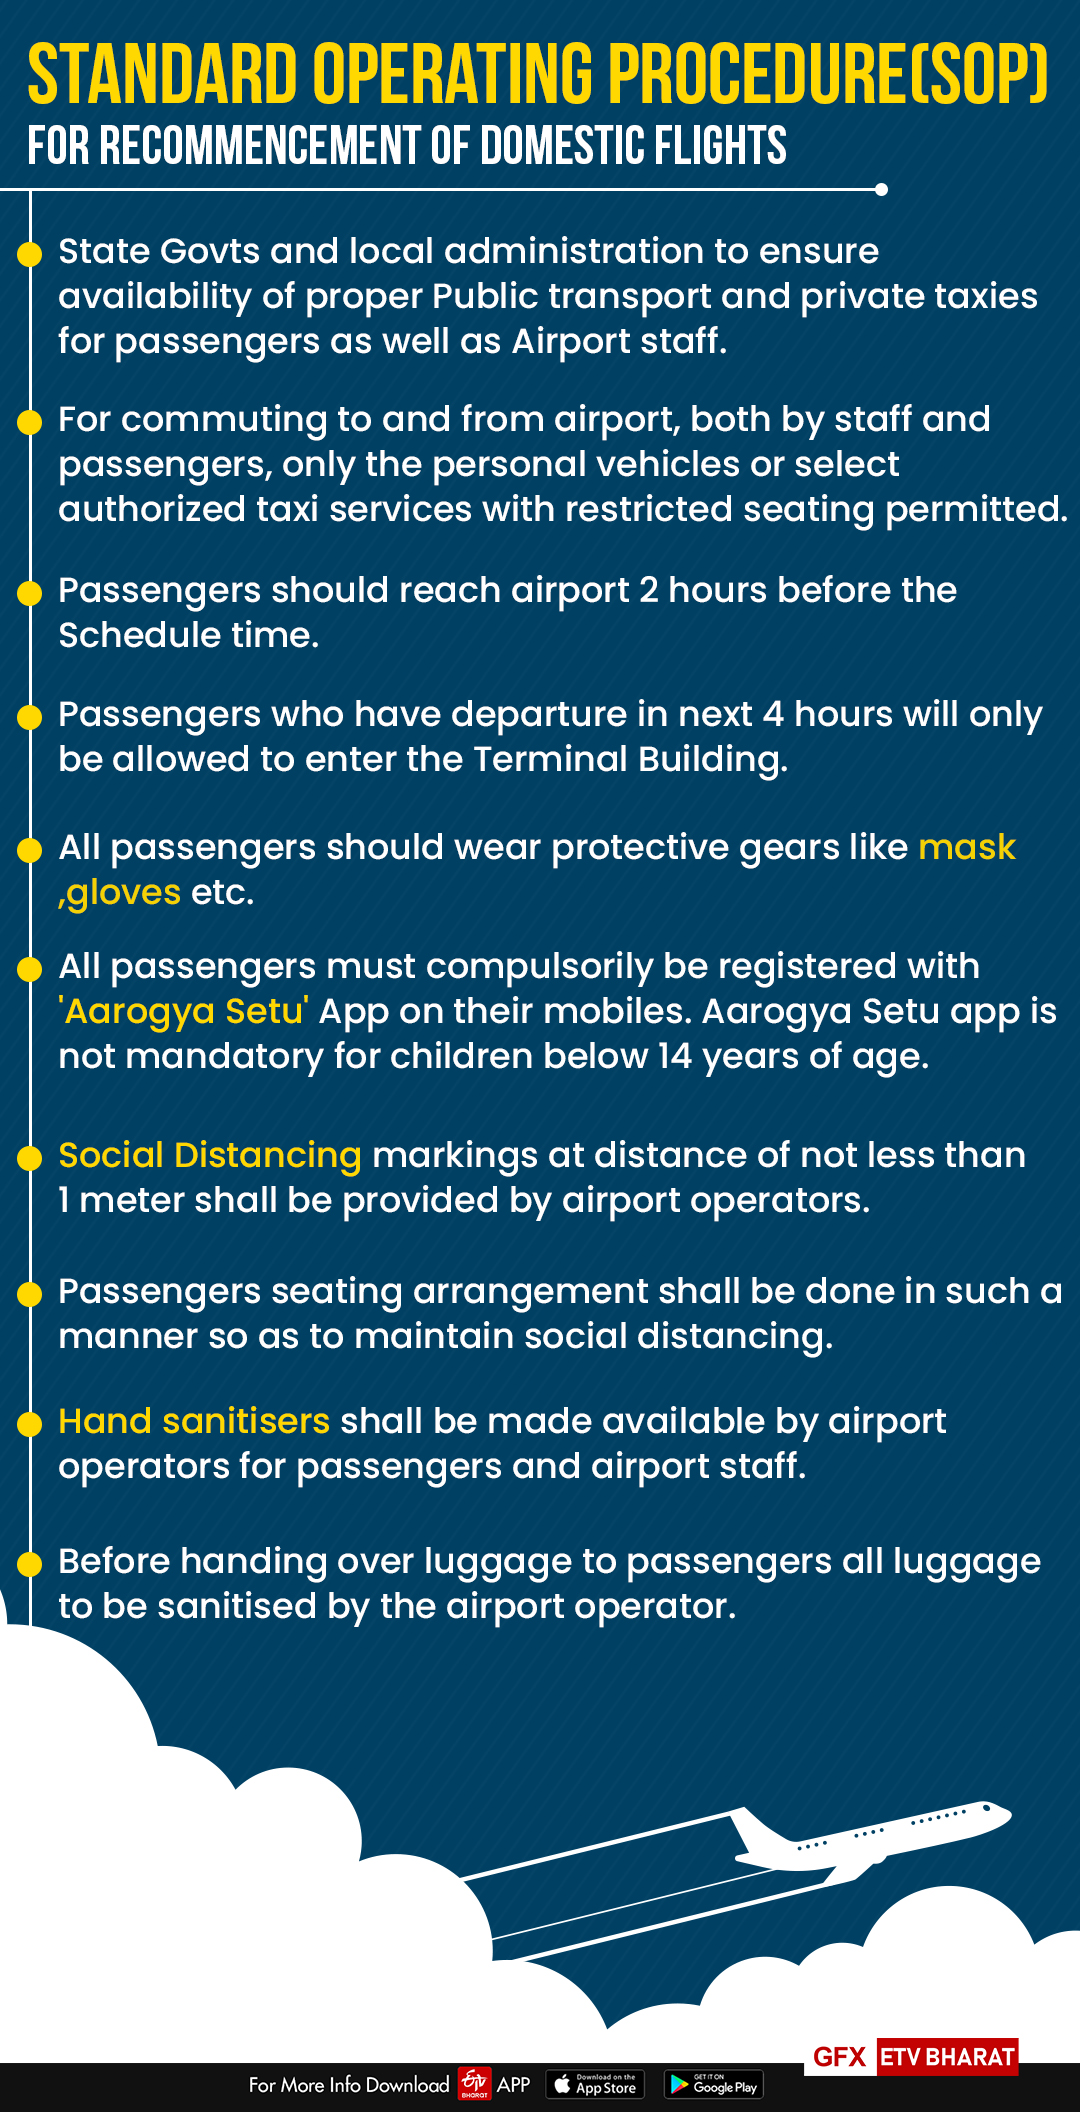 Standard Operating Procedures for airline passengers